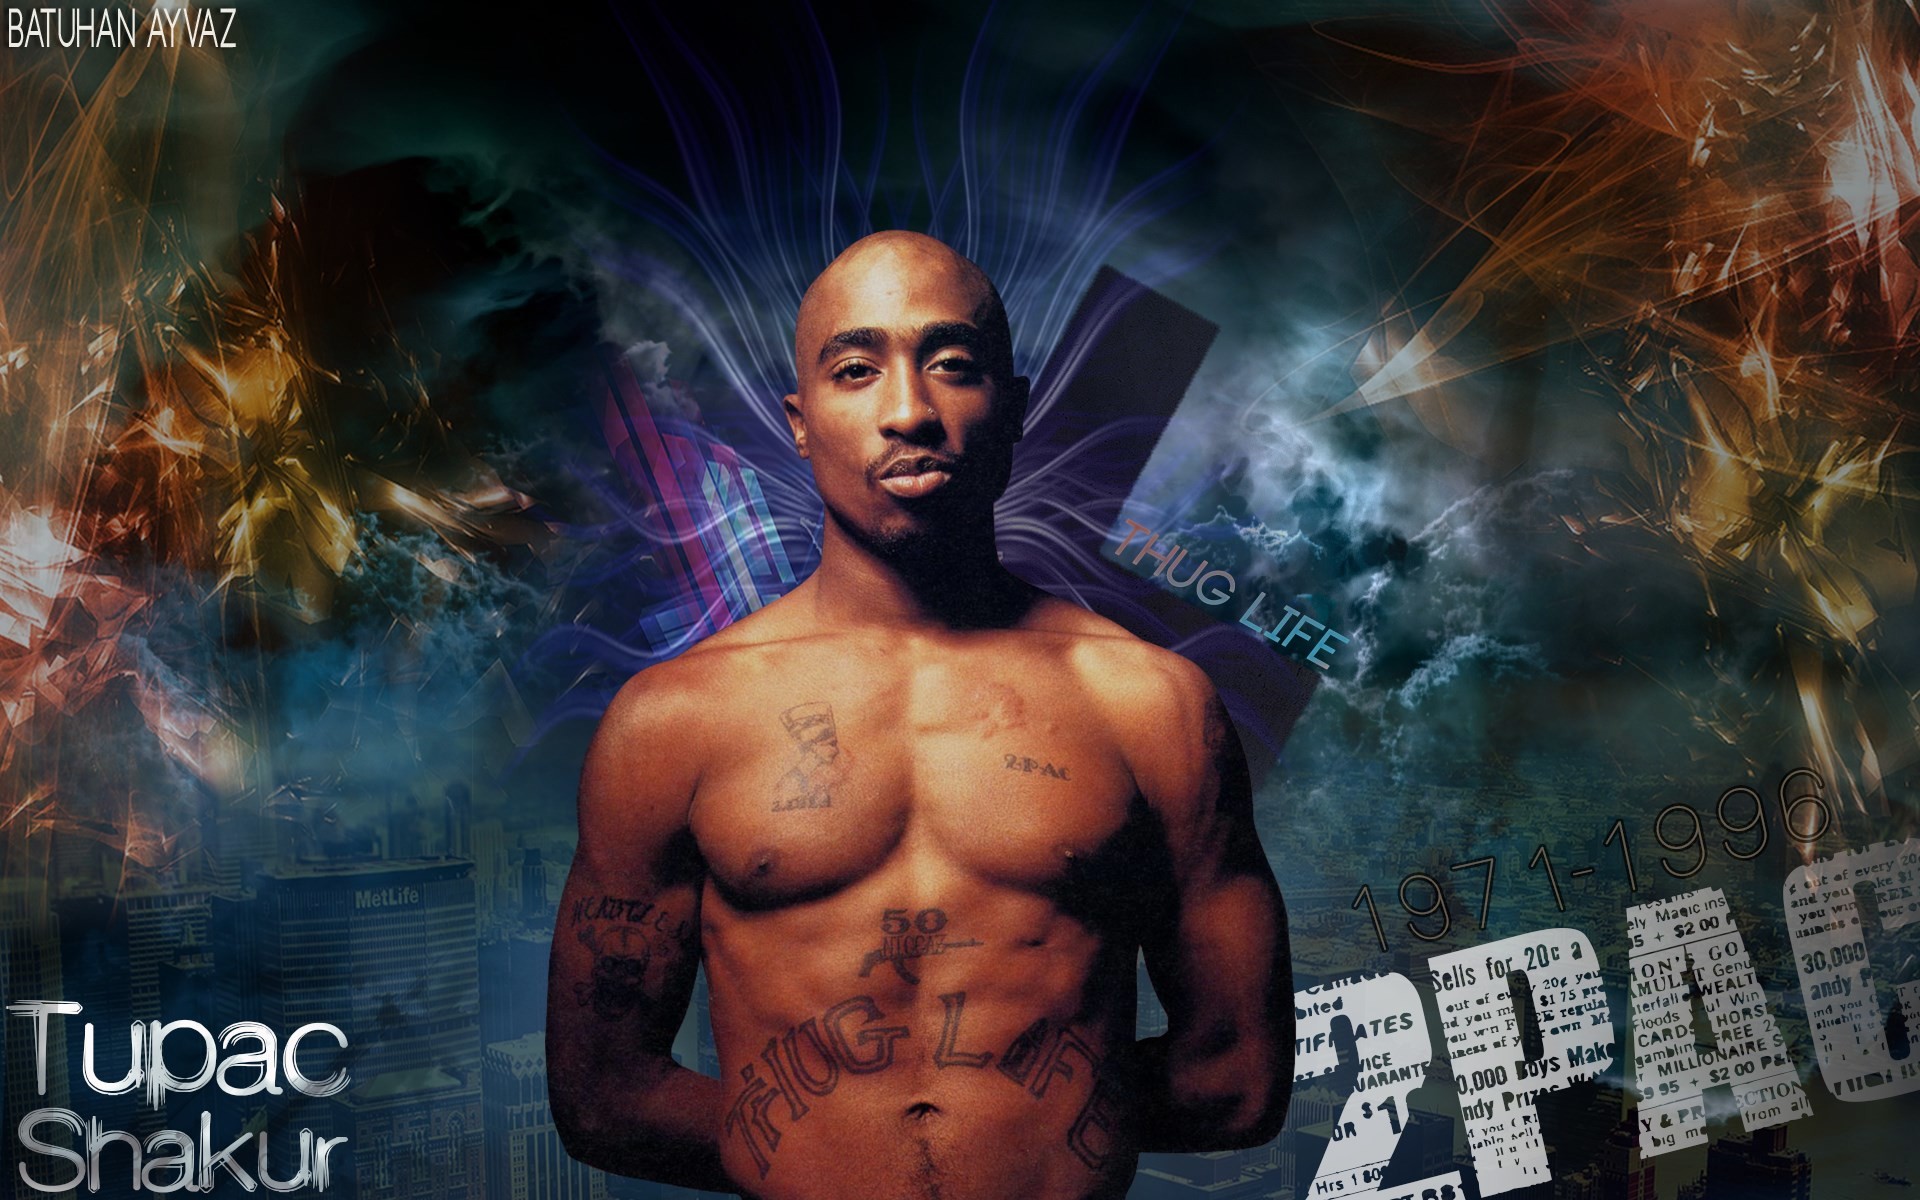 px High Resolution Wallpapers = 2pac picture by Canyon Hardman  for : pocketfullofgrace.com